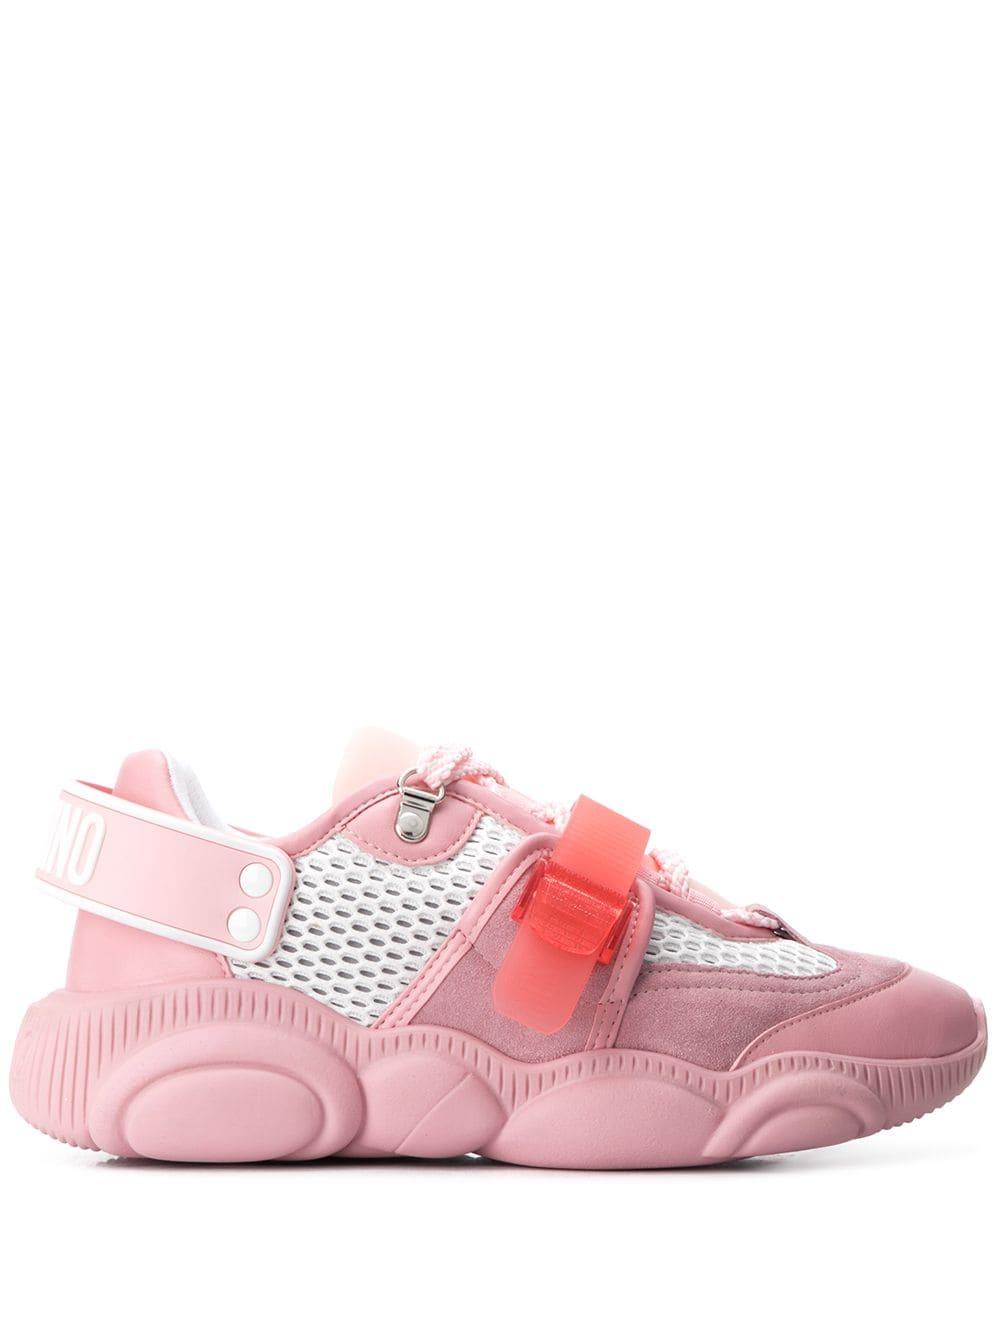 Moschino Leather Teddy Sneakers in Pink,White (Pink) | Lyst